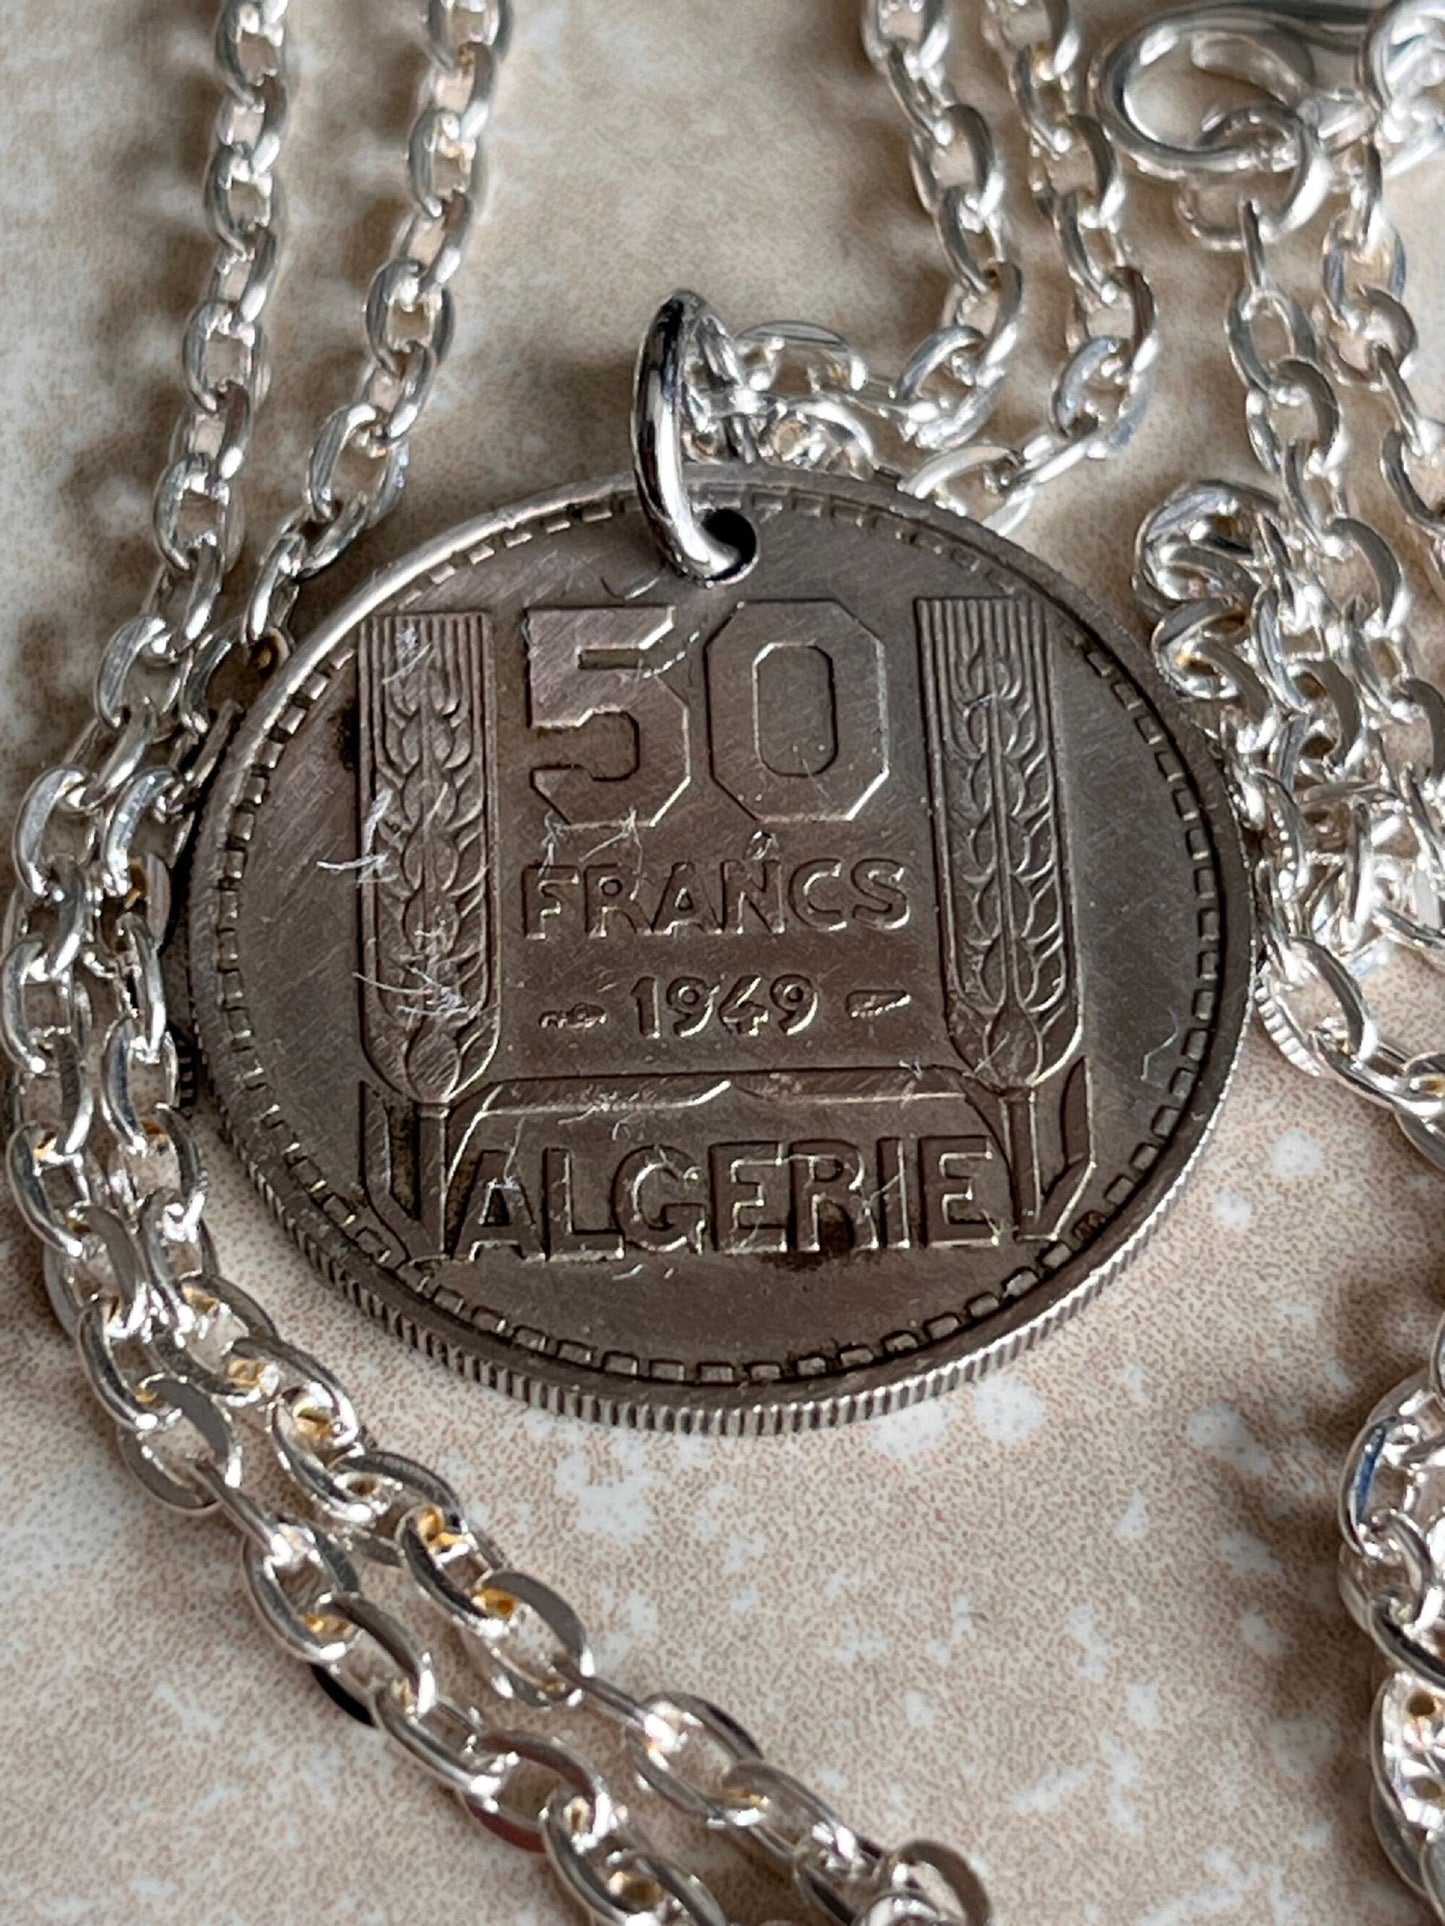 France Coin Necklace French 50 Franc Liberte Egalite Fraternite Personal Pendant Jewelry Gift Friend Charm For Him Her World Coin Collector